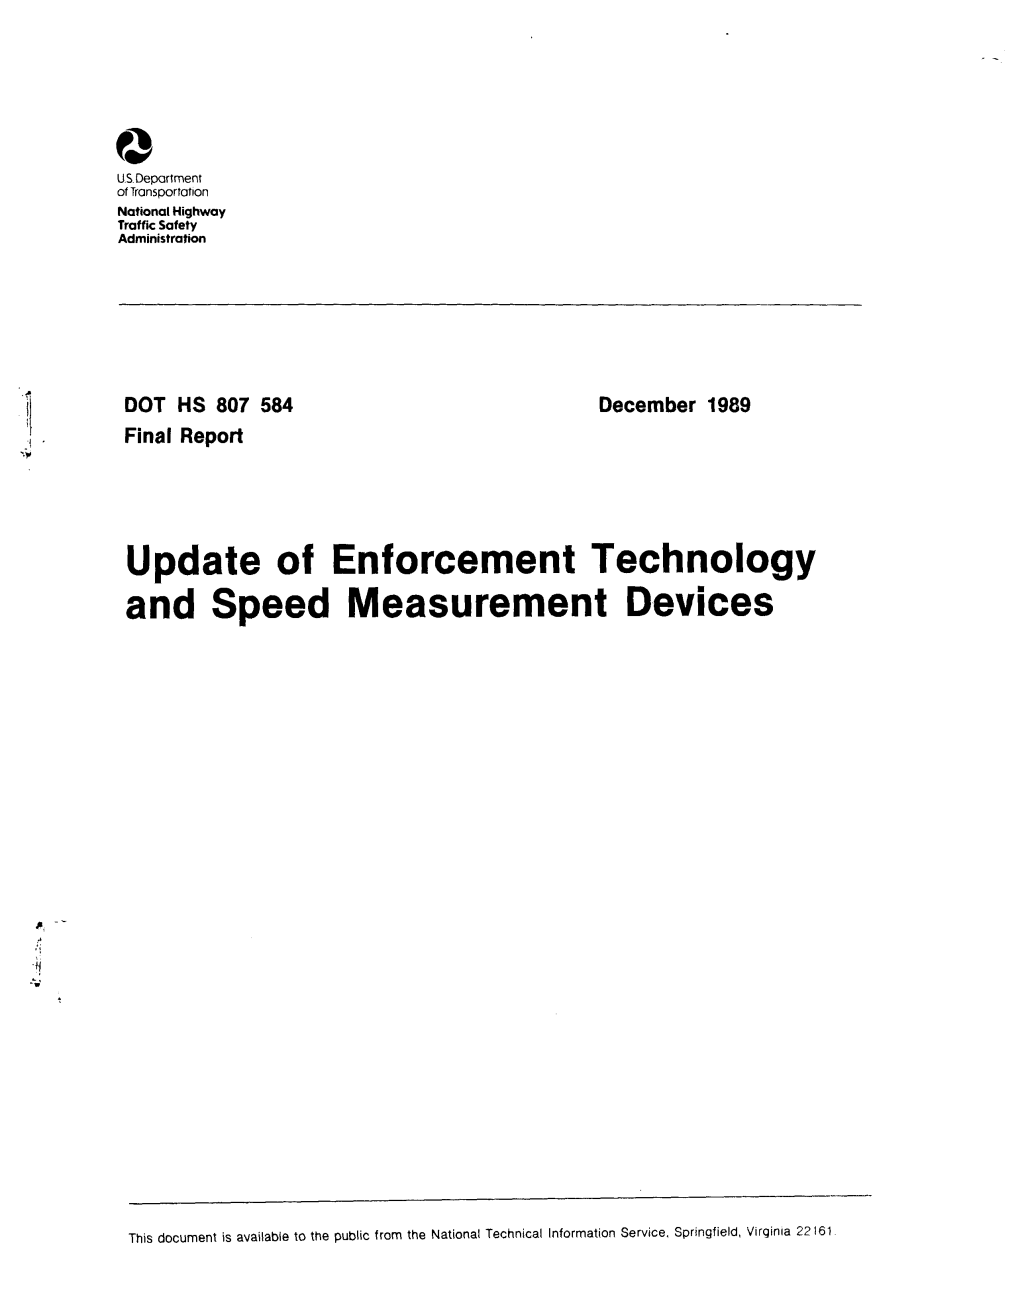 Update of Enforcement Technology and Speed Measurement Devices